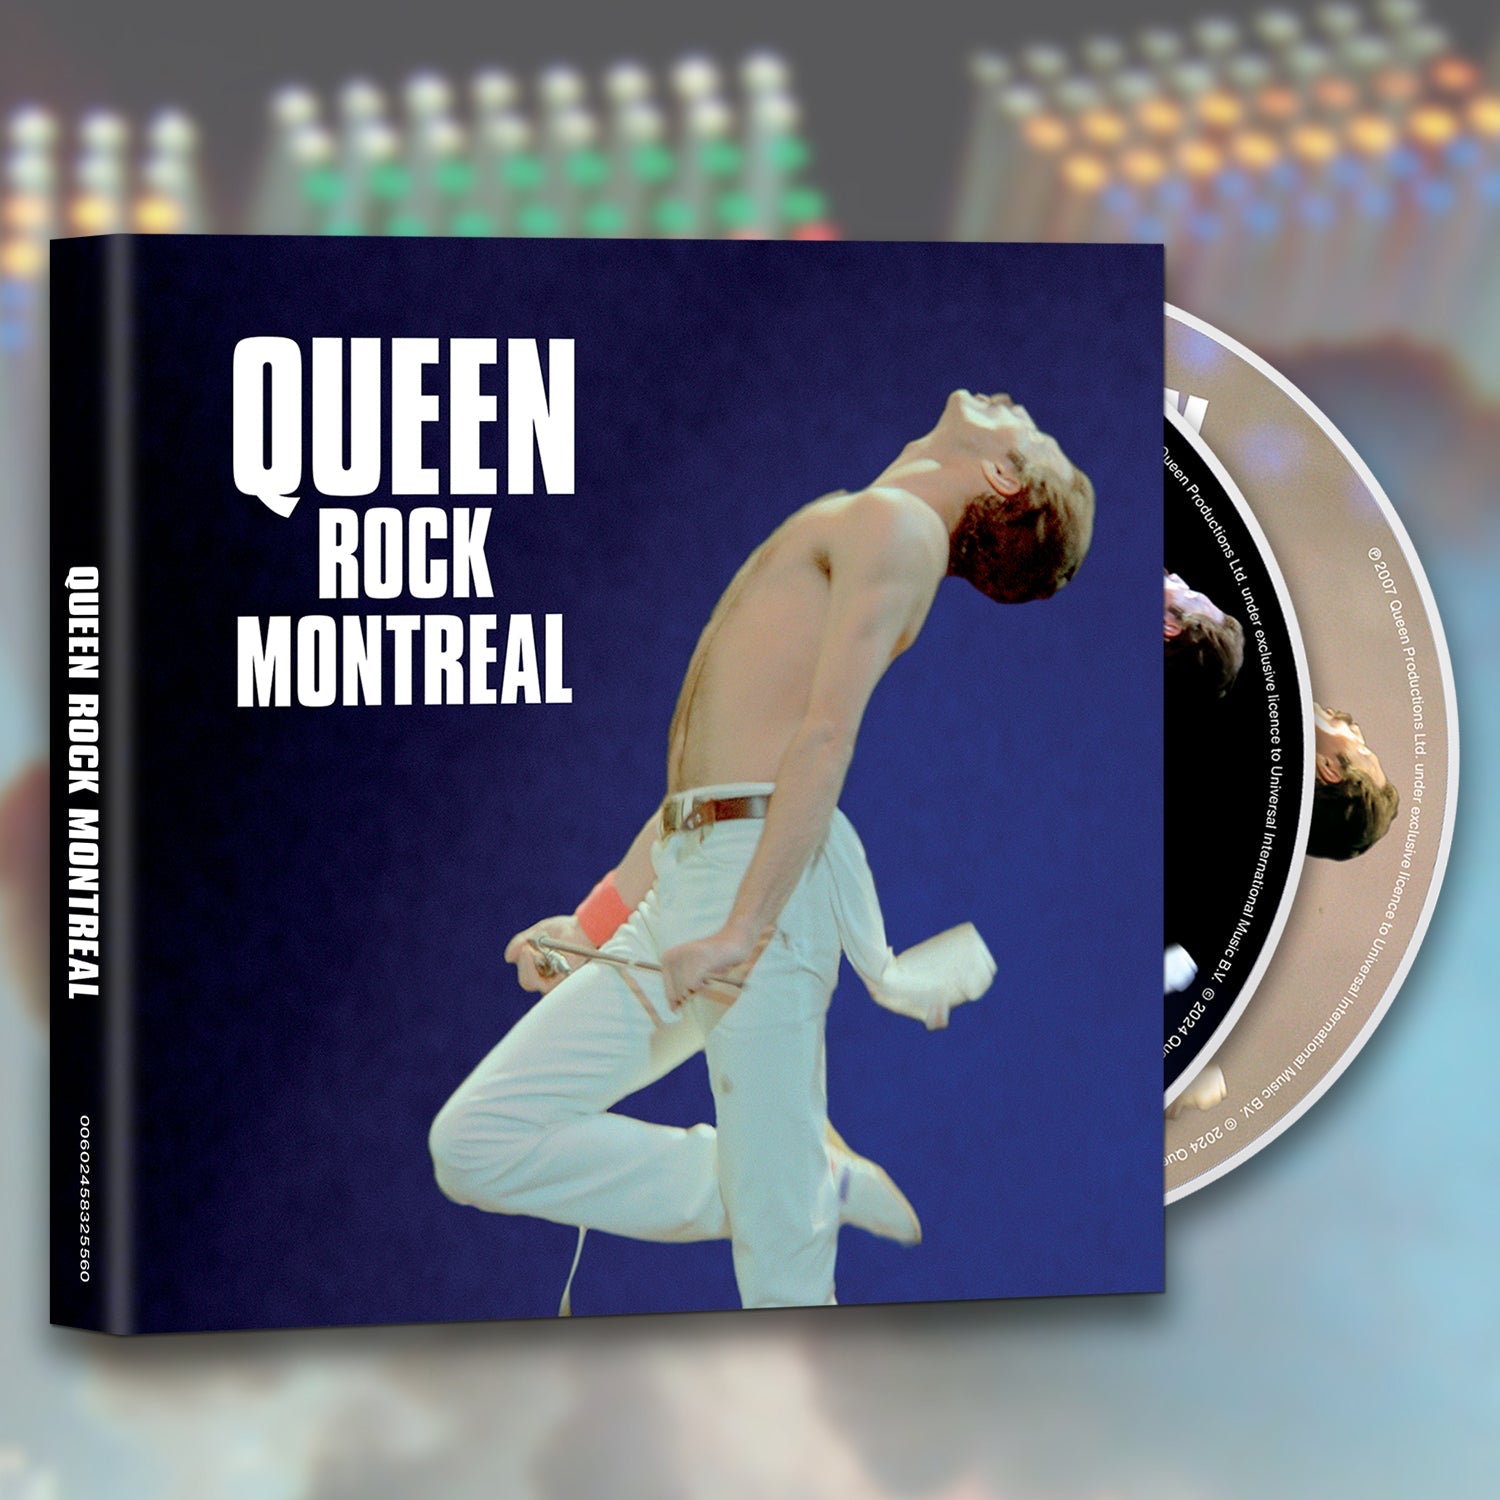 Rock Montreal 4K Ultra HD Edition, Double CD & Coloured Vinyl.